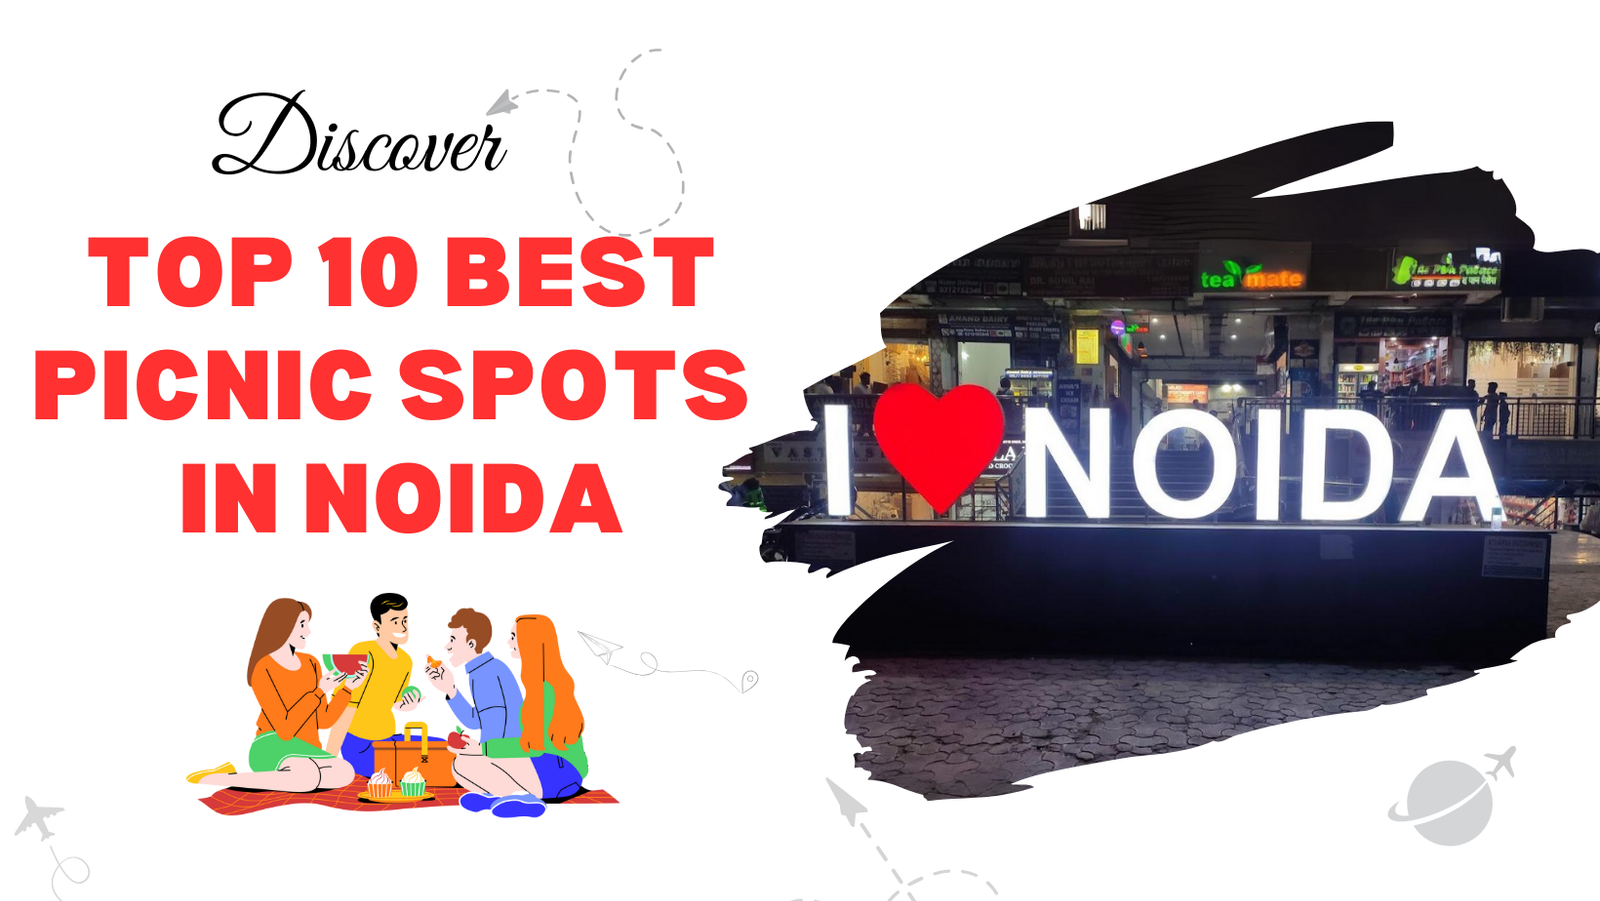 Discover the Top 10 Best Picnic Spots in Noida